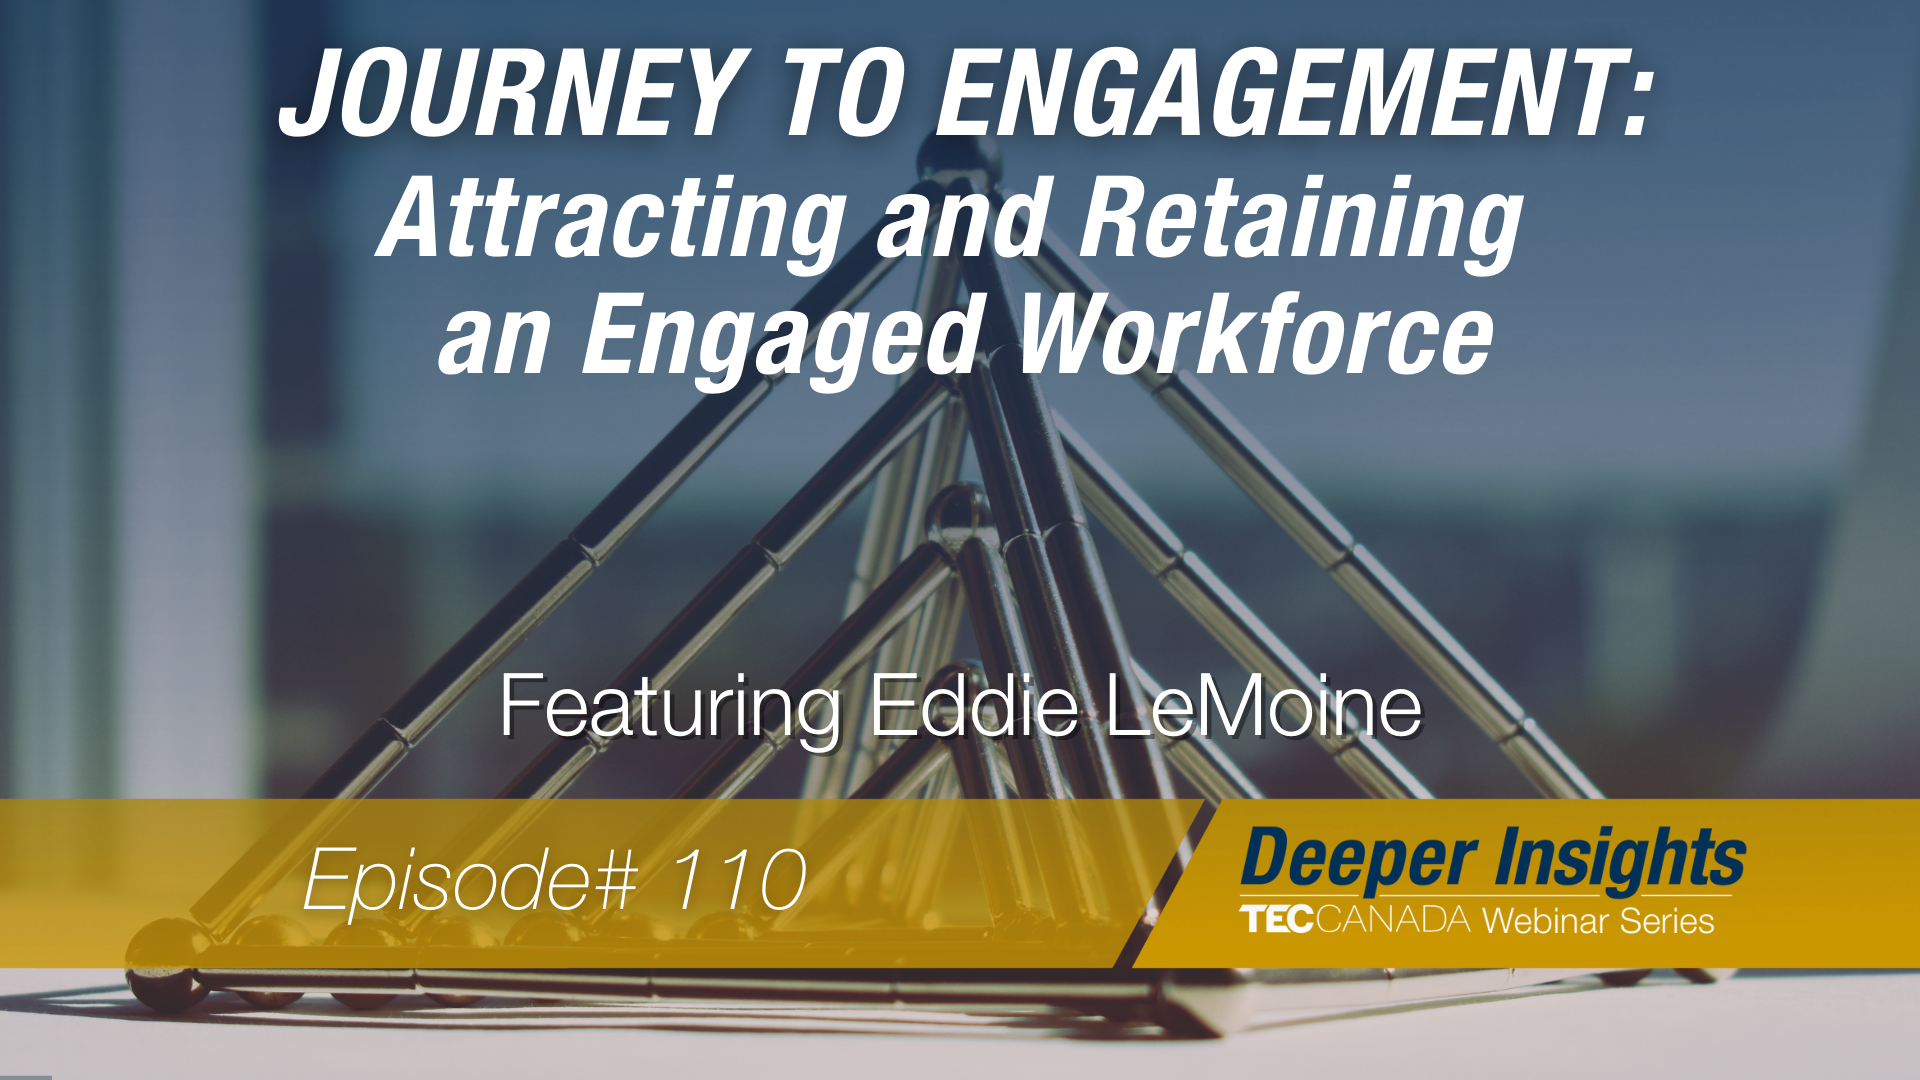 Eddie Lemoine: Journey to Engagement: Attracting and Retaining an Engaged Workforce